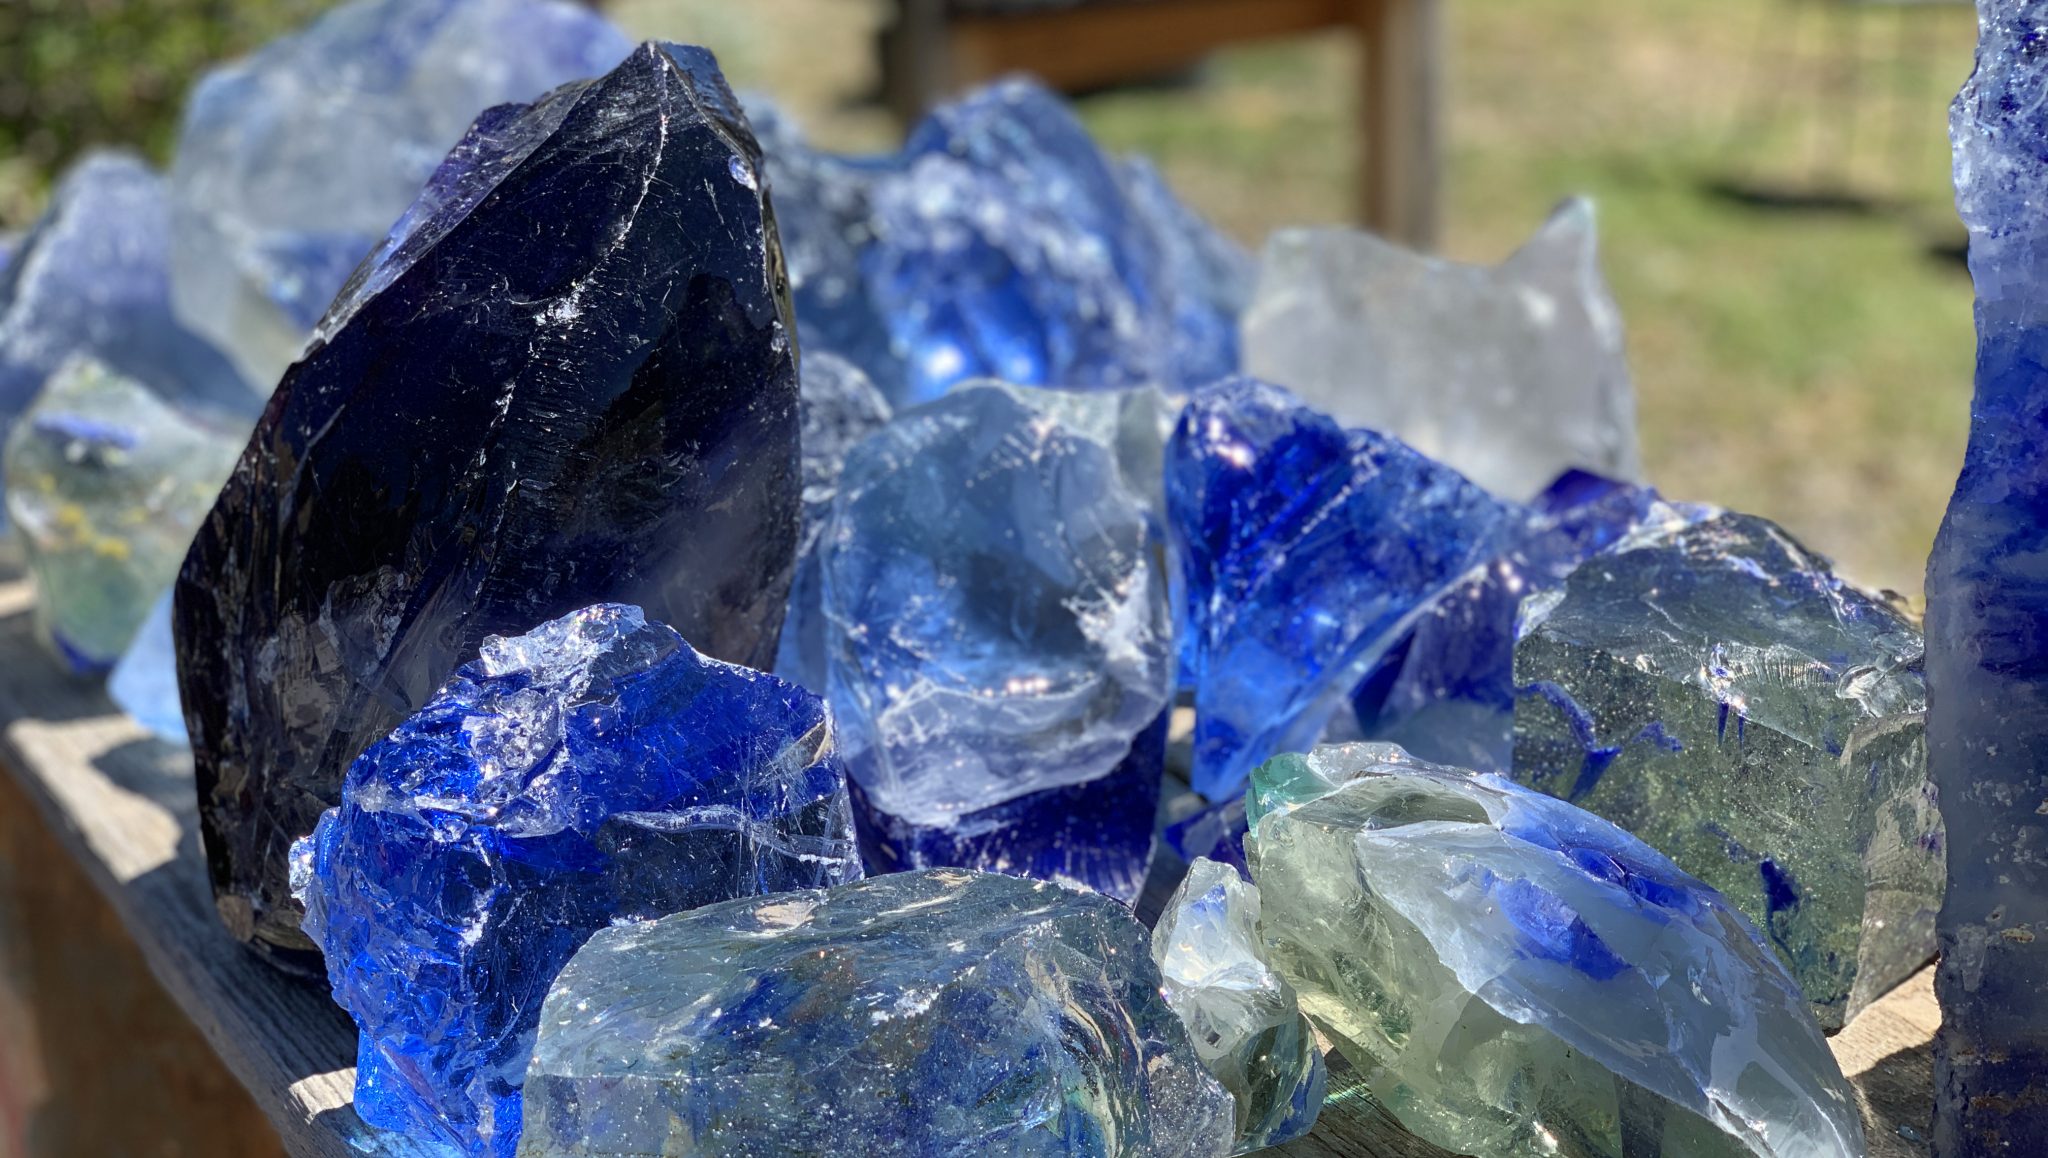 Pile of blue glass chunks in the sun